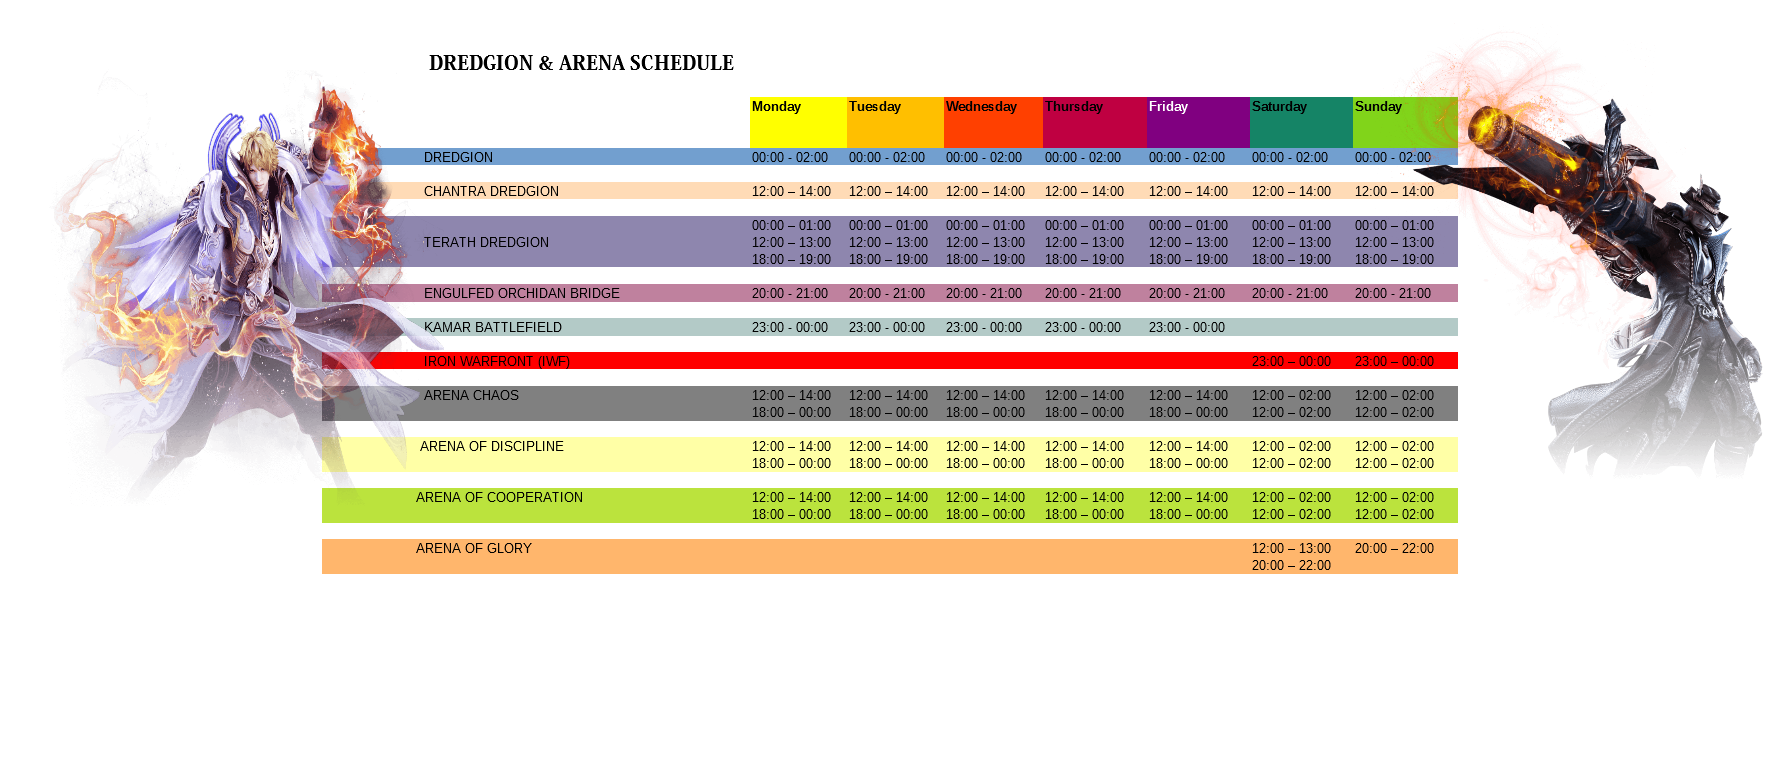 Global Aion Arena Dredgion Schedule